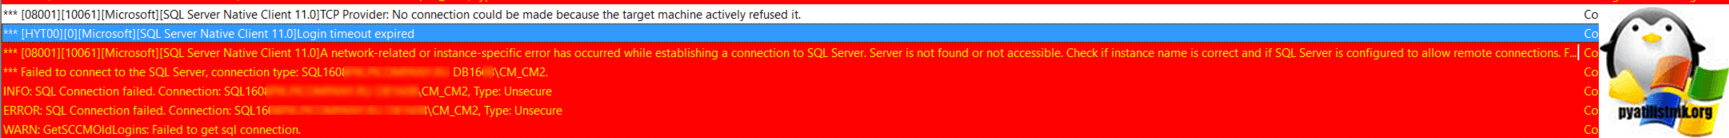 SQL Connection failed. Connection